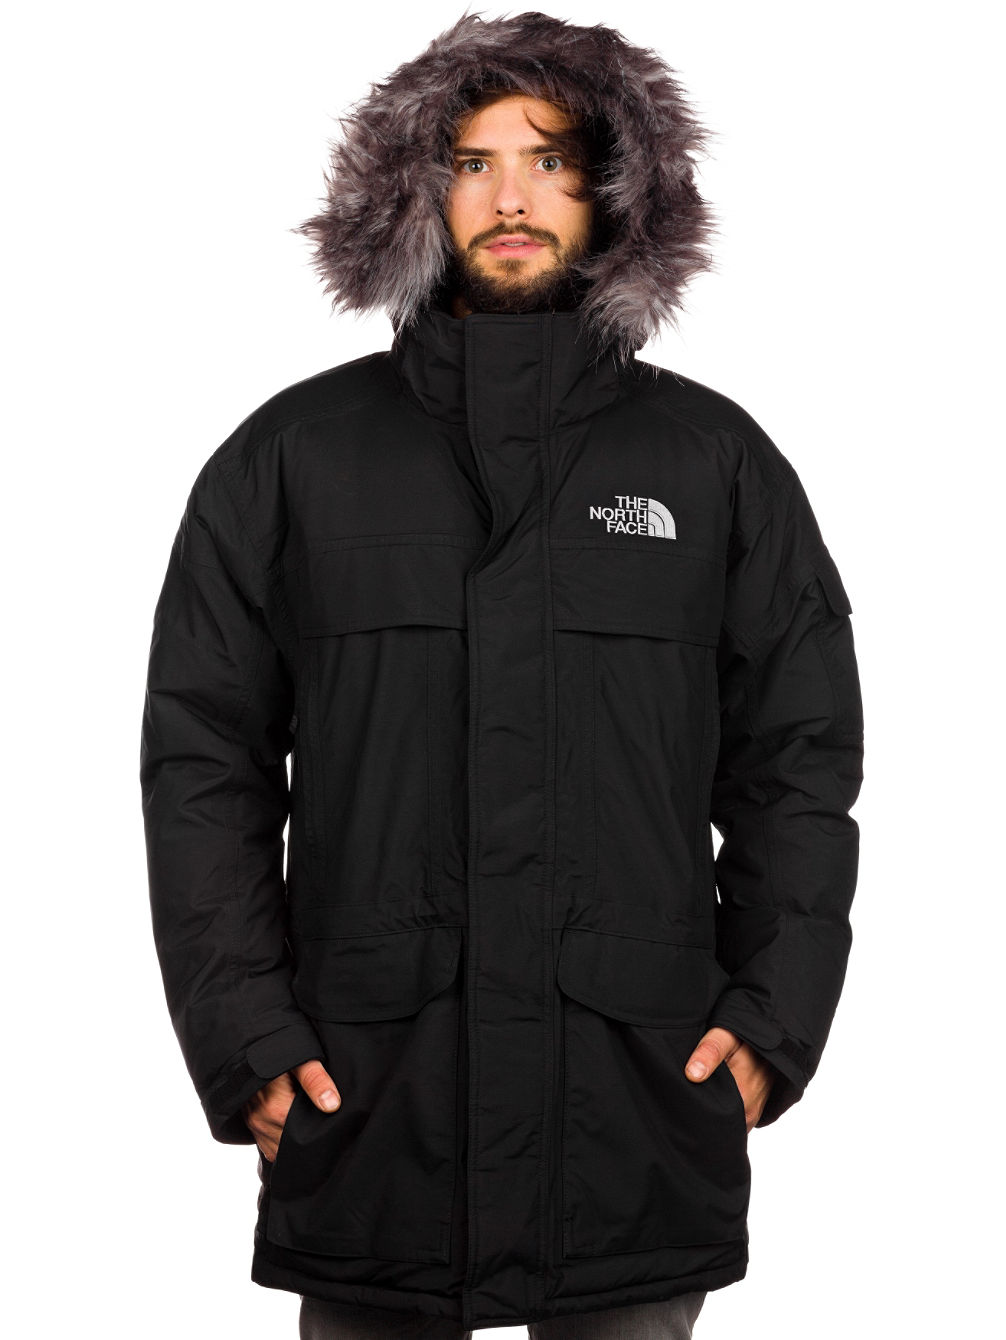 Buy The North Face Mcmurdo Parka Jacket online at blue-tomato.com